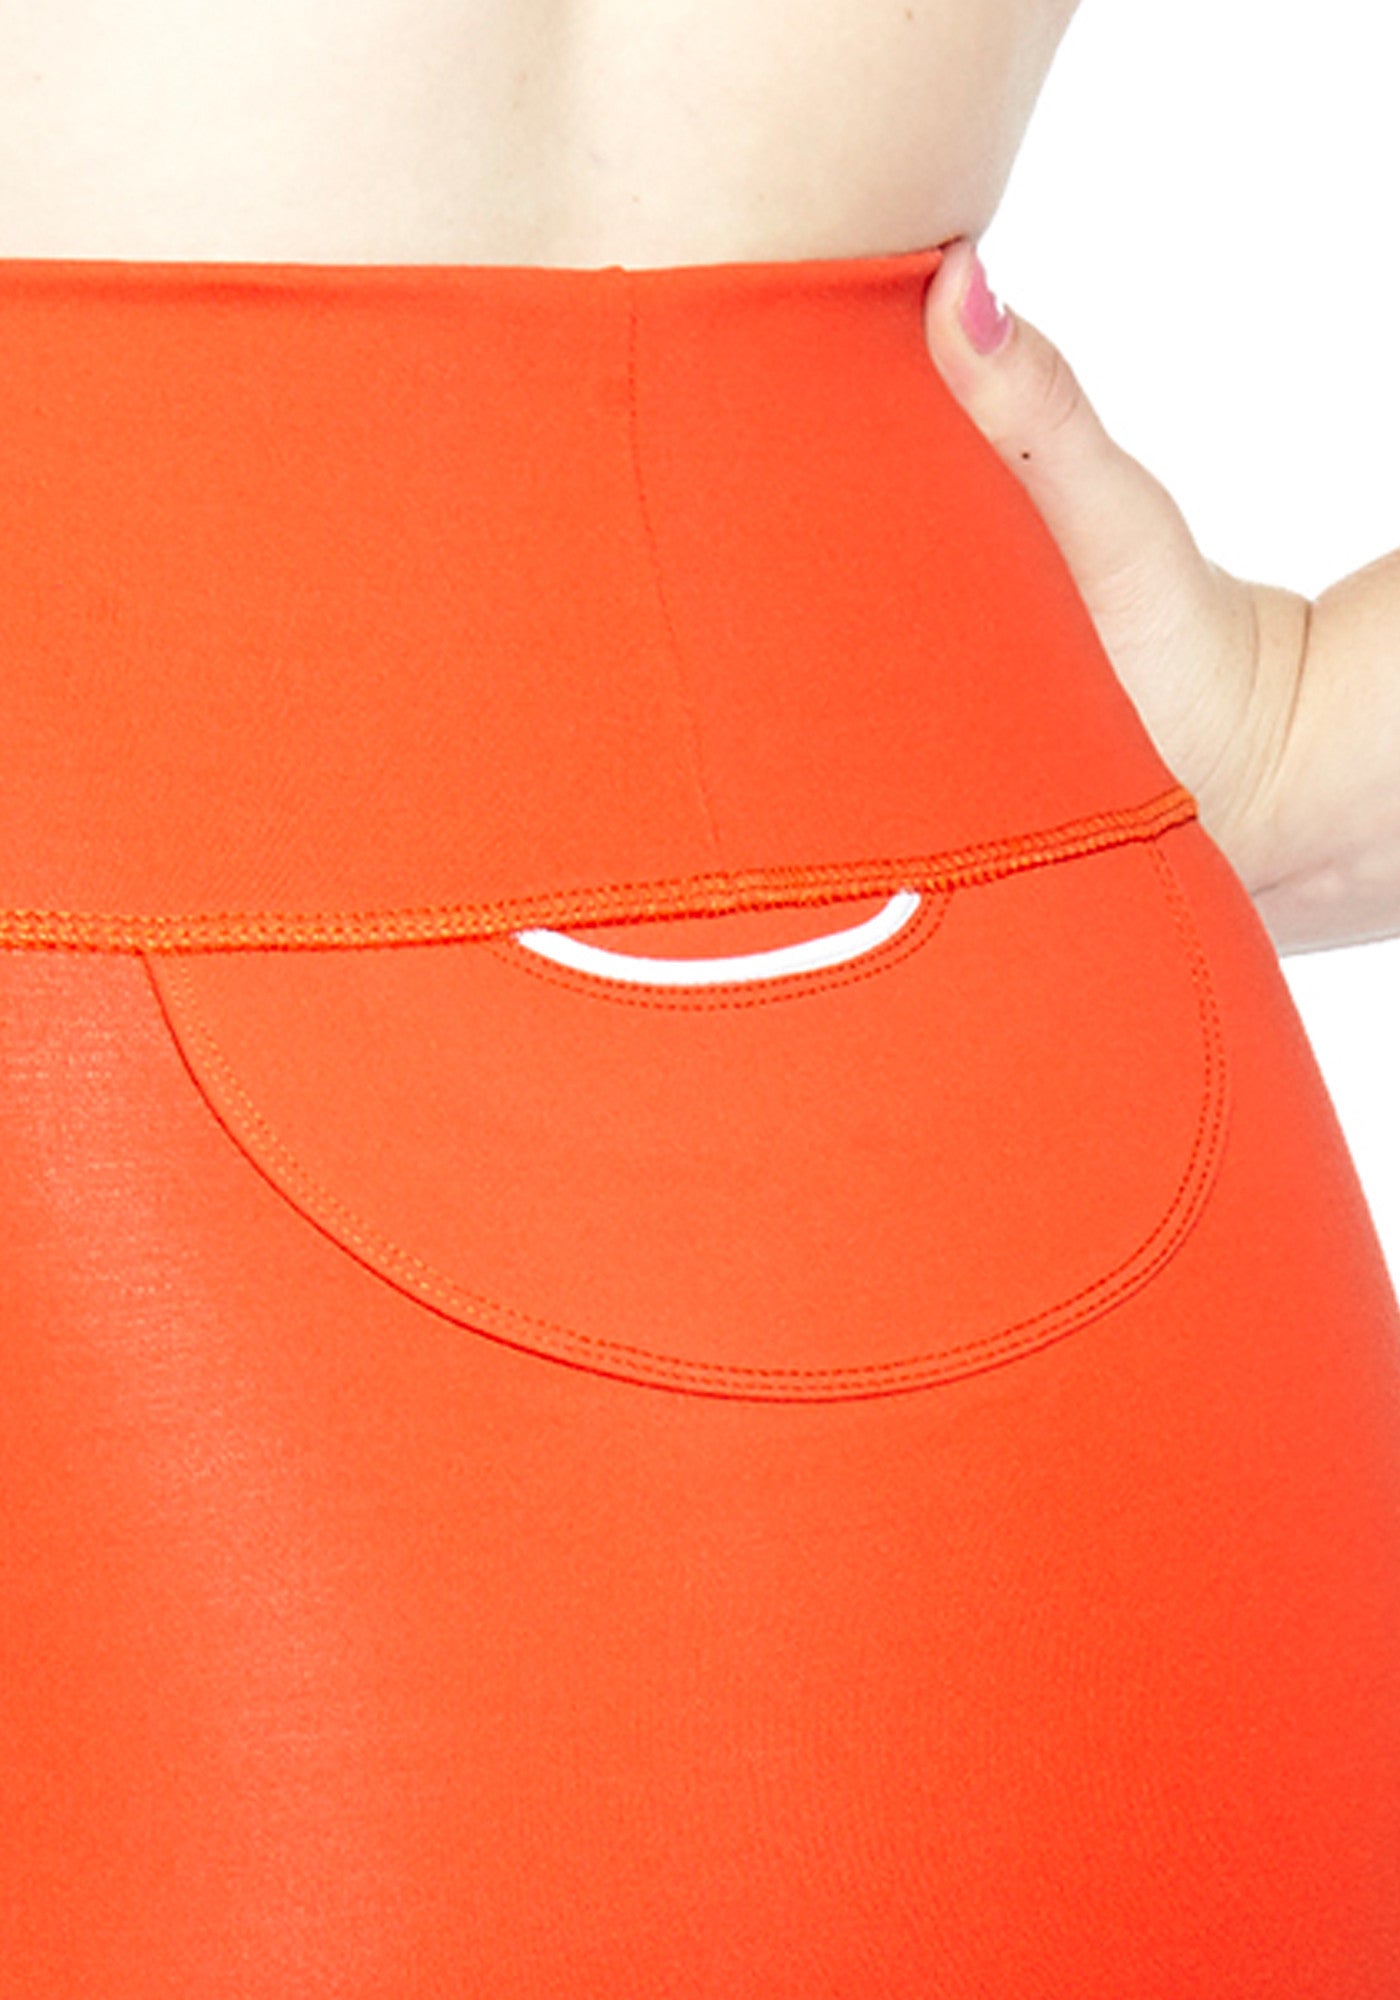 Back pocket close up of comfortable Mini Skirt in thick stretch fabric. Bright Poppy Red with contrast white panel and hem stitch. Back pocket at waist.